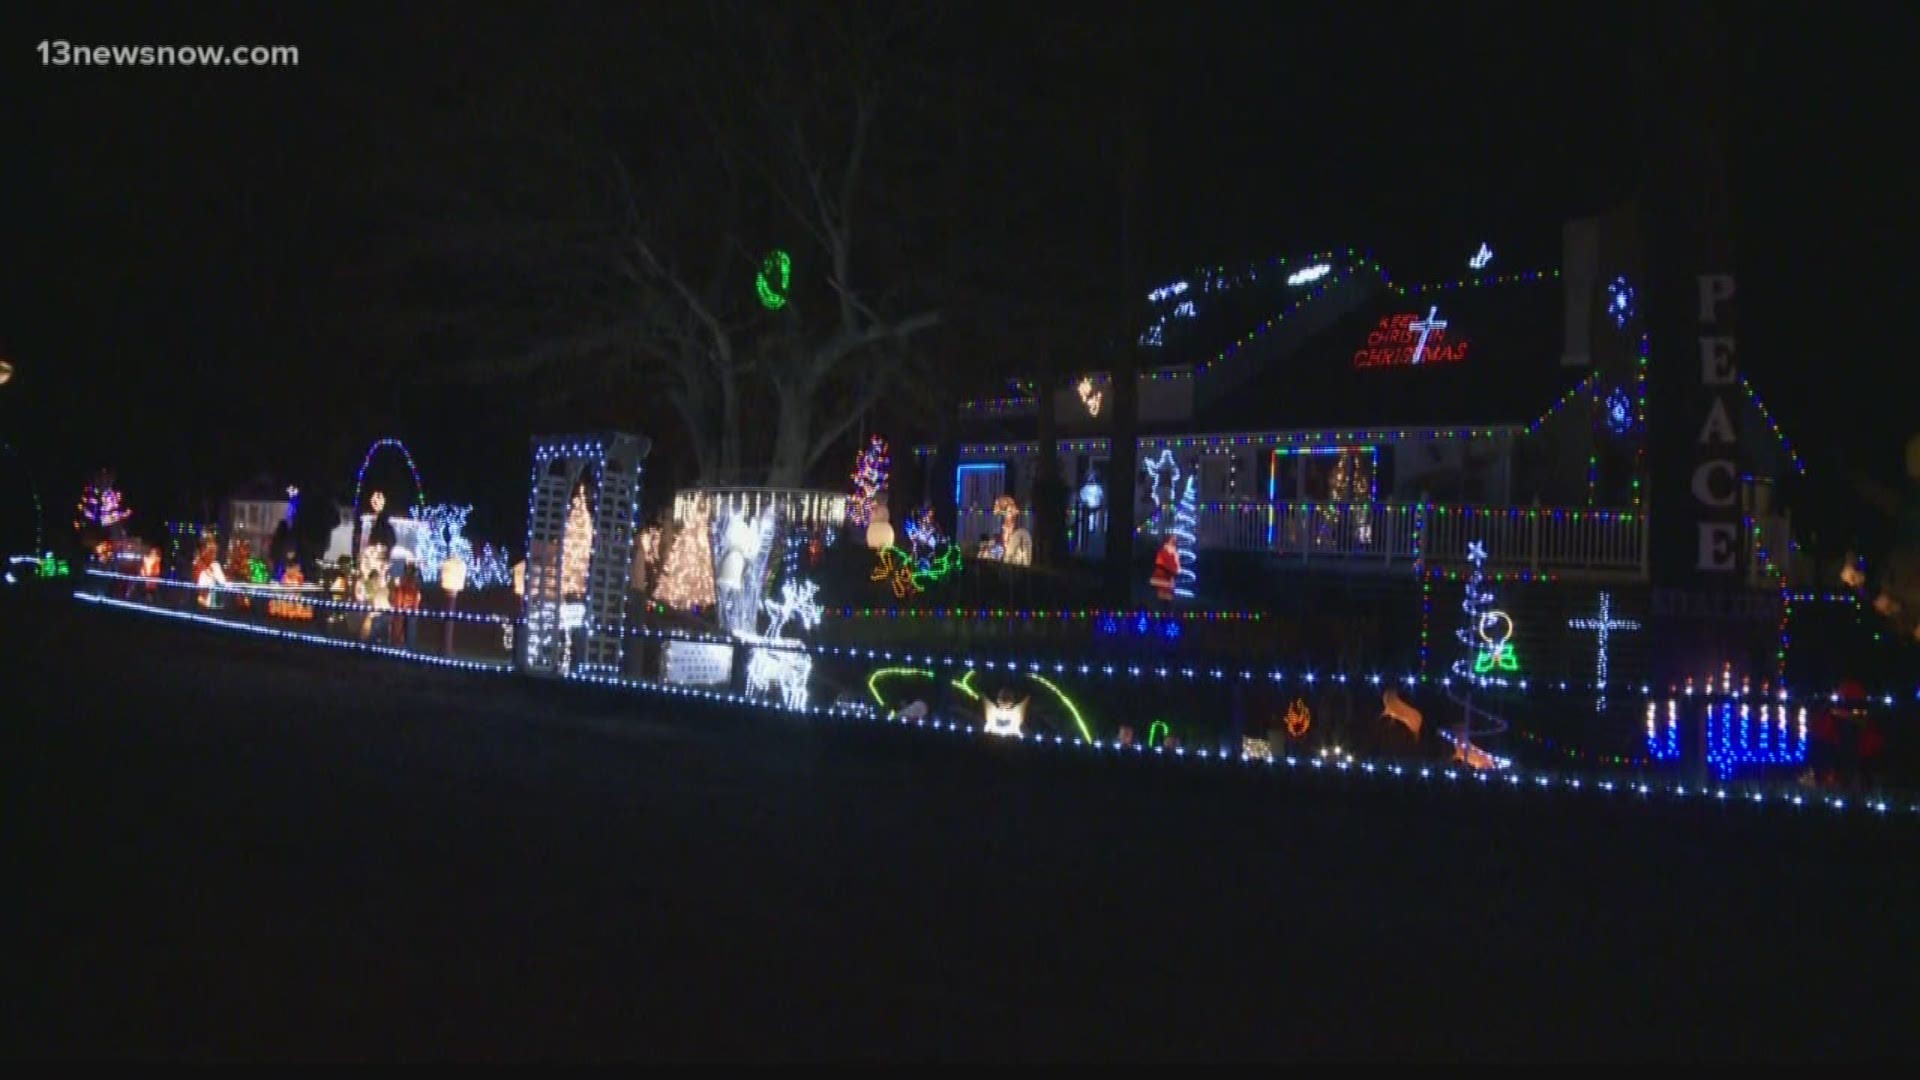 One North Carolina family have shared a dazzling lights display for decades, but this year was almost different.